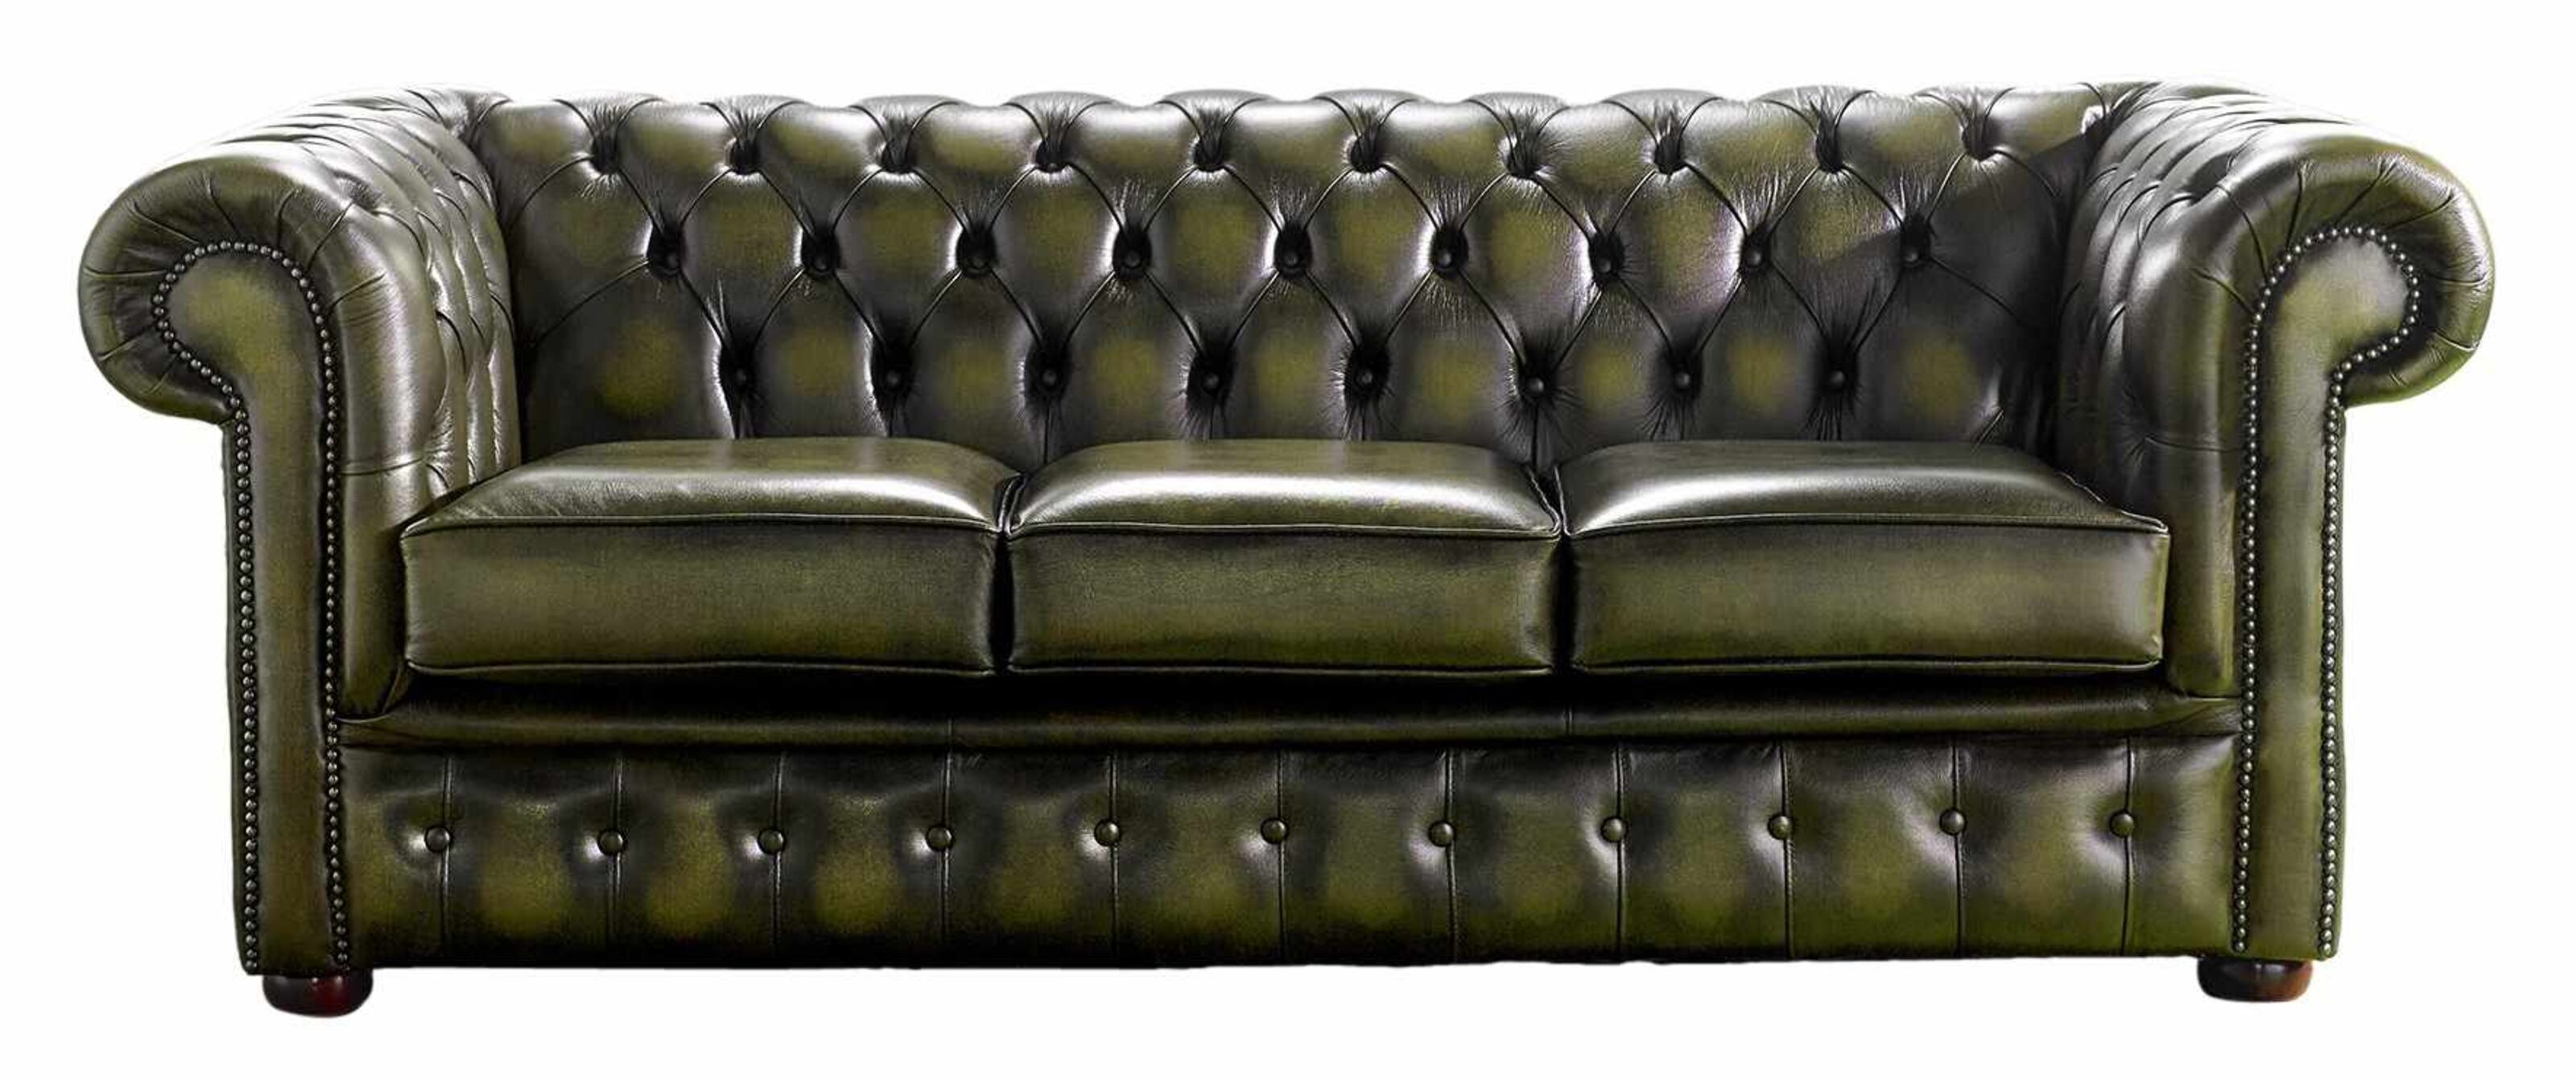 Variety in Elegance: Exploring the Diversity of Chesterfield Sofa Designs  %Post Title